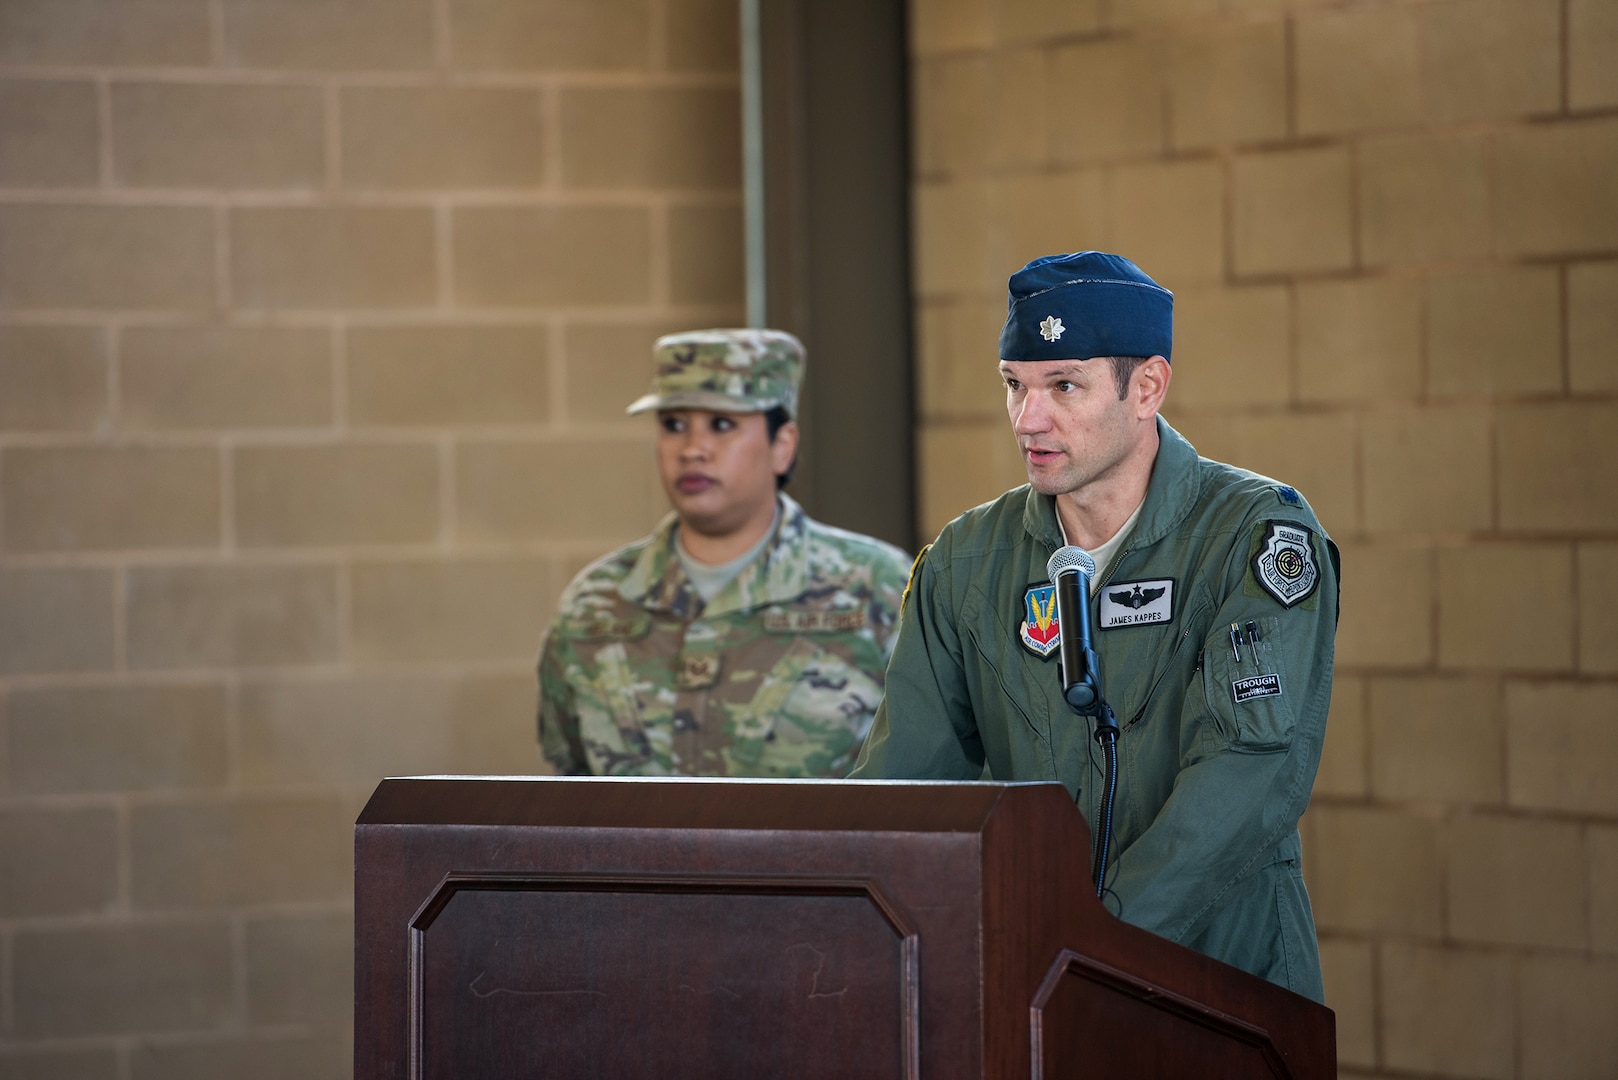 U.S. Air Force Lt. Col. James Kappes, 6th Combat Training Squadron operations officer, Camp Bullis, presents opening remarks during the activation and assumption of command ceremony of Detachment 2, Combat Training Squadron, Sept. 17, 2019, at Joint Base San Antonio-Medina Annex, Texas.